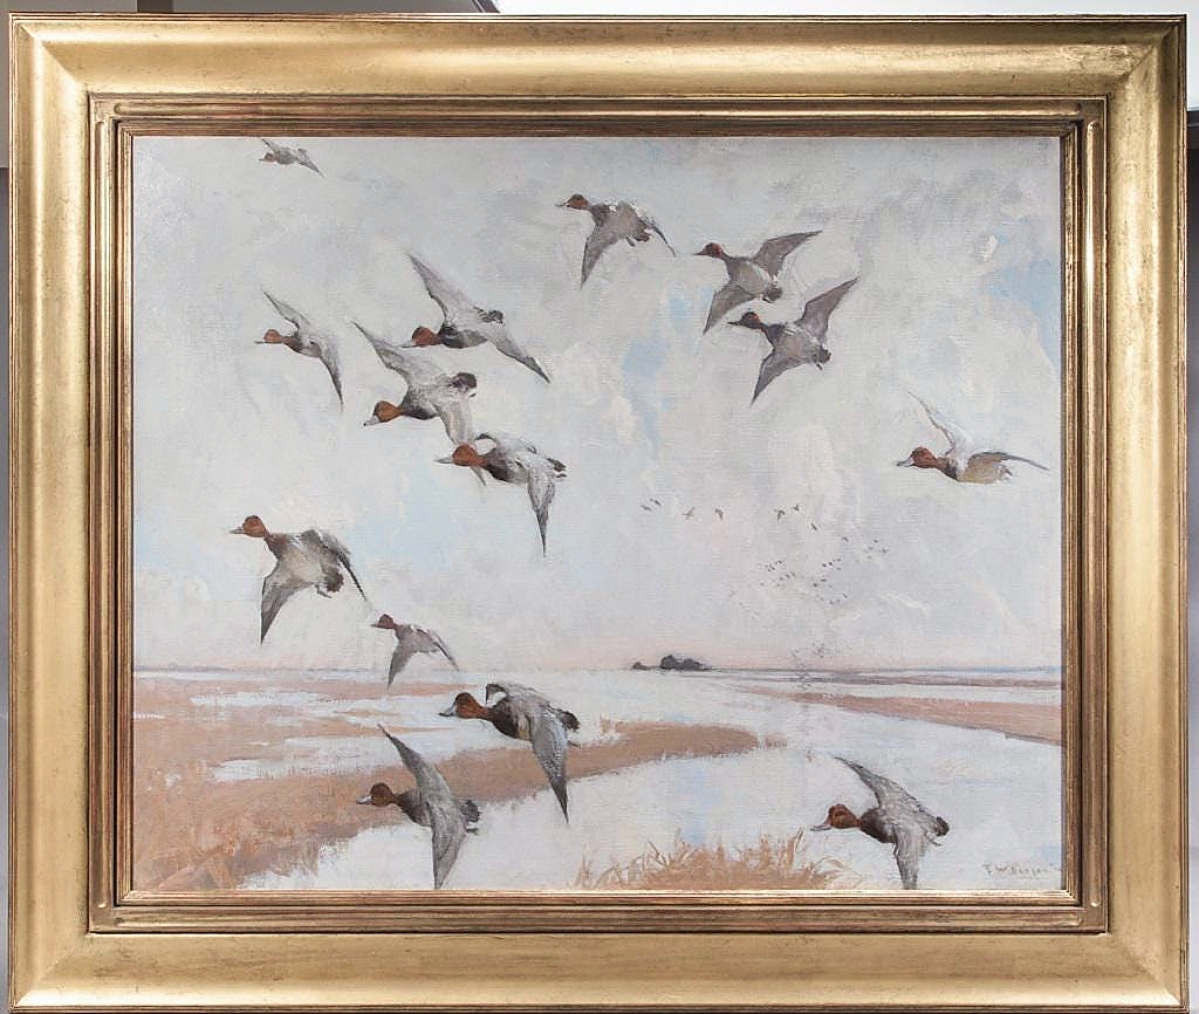 At $270,000, “Redheads in Flight” by Frank Benson was the highest priced item in the auction. Few early oil paintings of waterfowl by Benson are known to exist. This one was probably inspired by time Benson spent at the Long Point hunt club on Lake Erie. The catalog includes extensive details, with quotes by the artist, of his hunting experiences at the club.